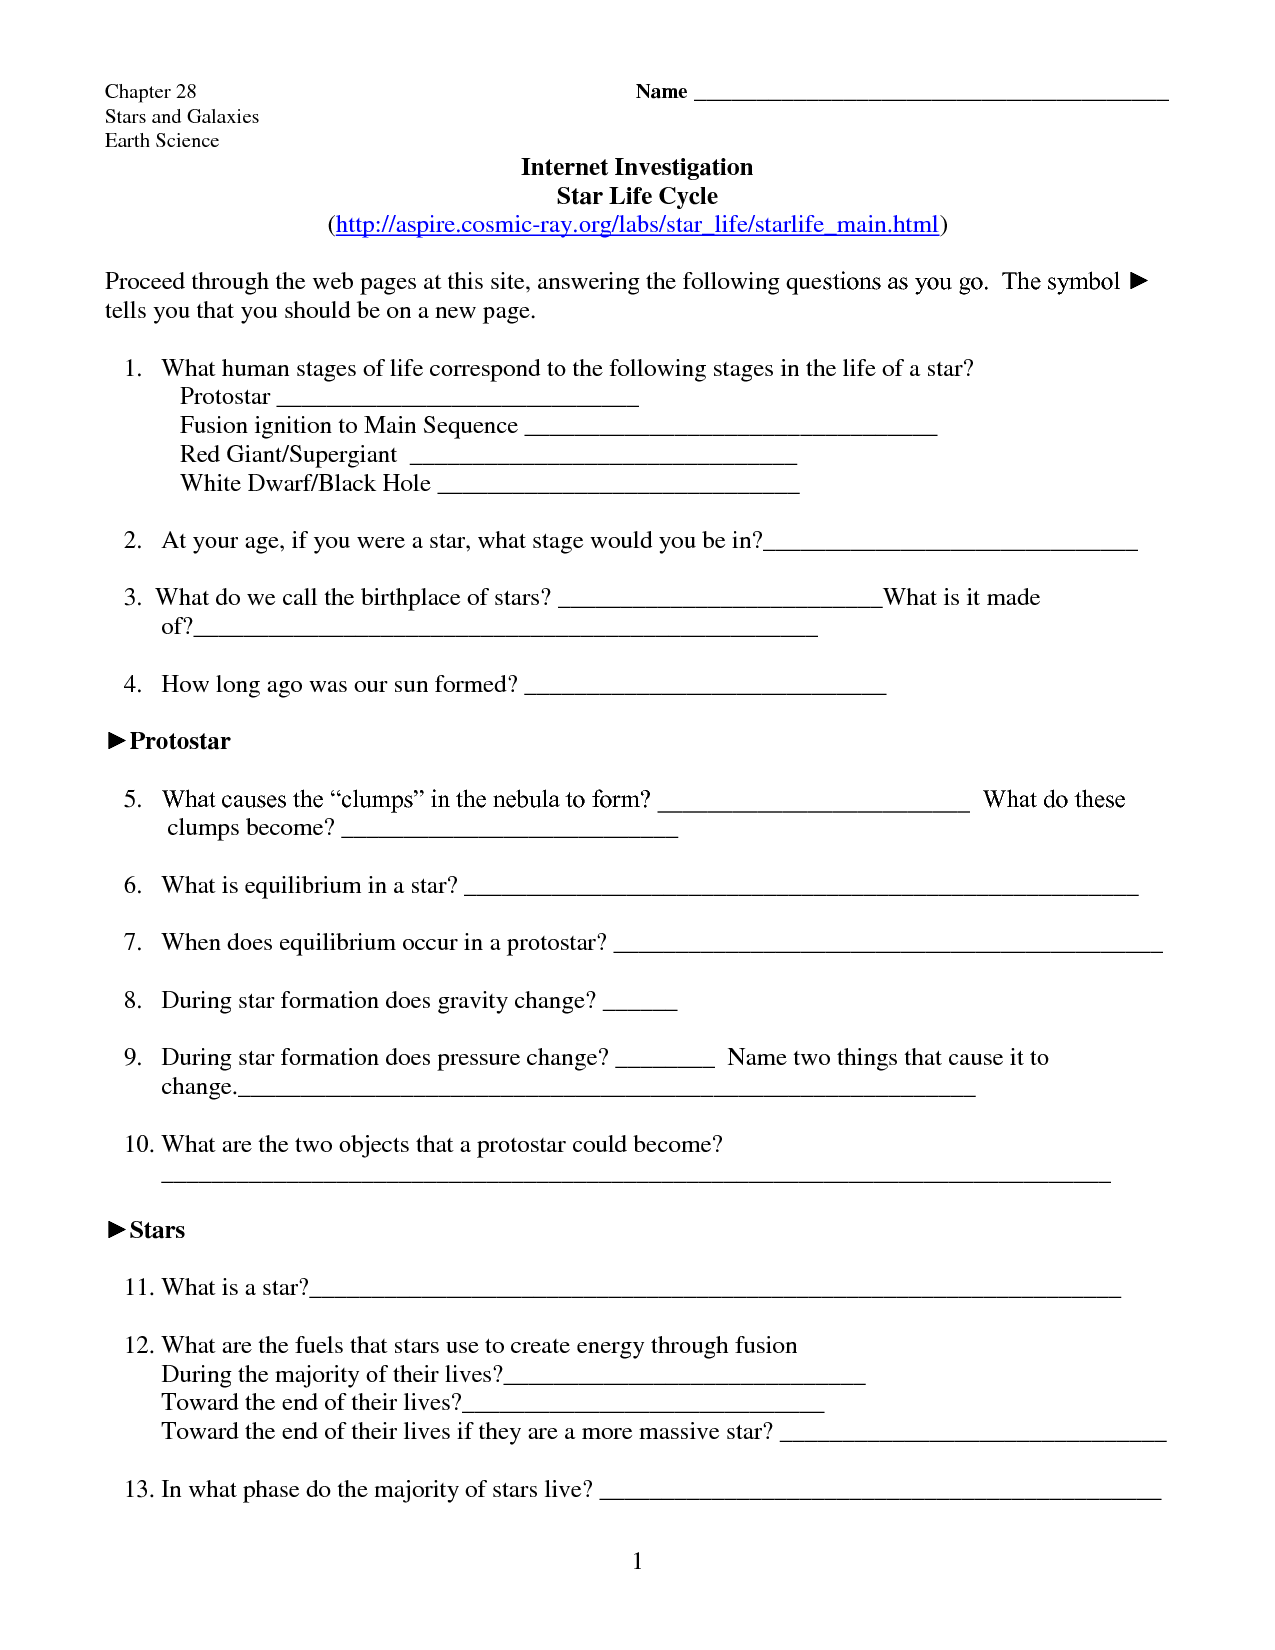 14 Best Images Of Star Life Cycle Worksheet Star Life Cycle Worksheet Answers Life Cycle Of A 